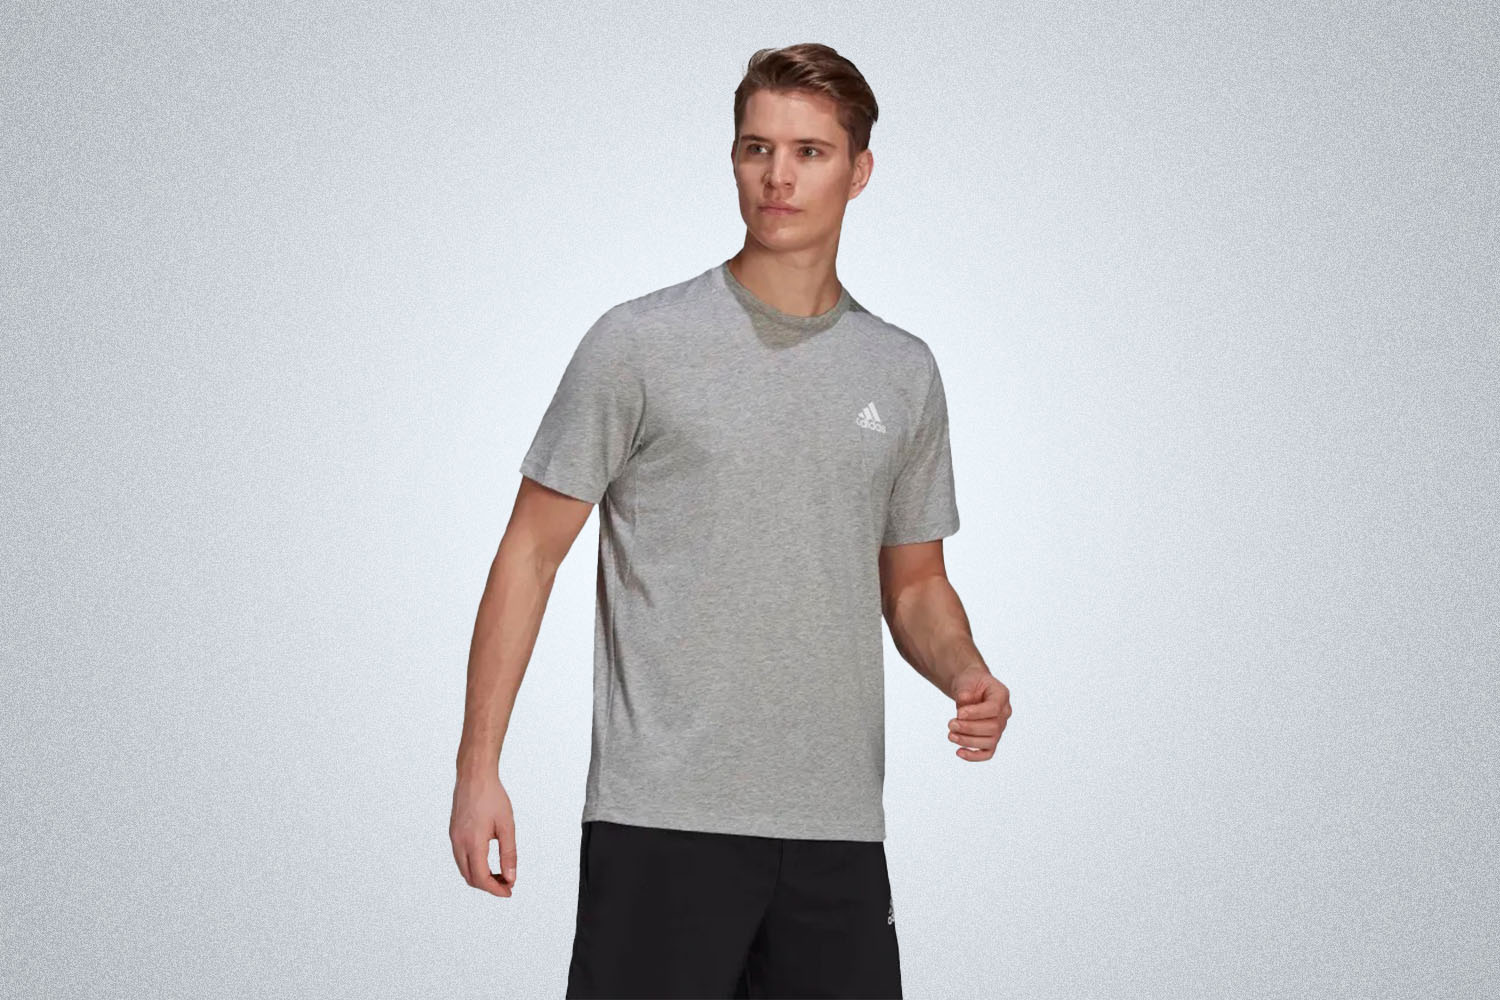 a model in a grey crewneck tee from Adidas on a grey background